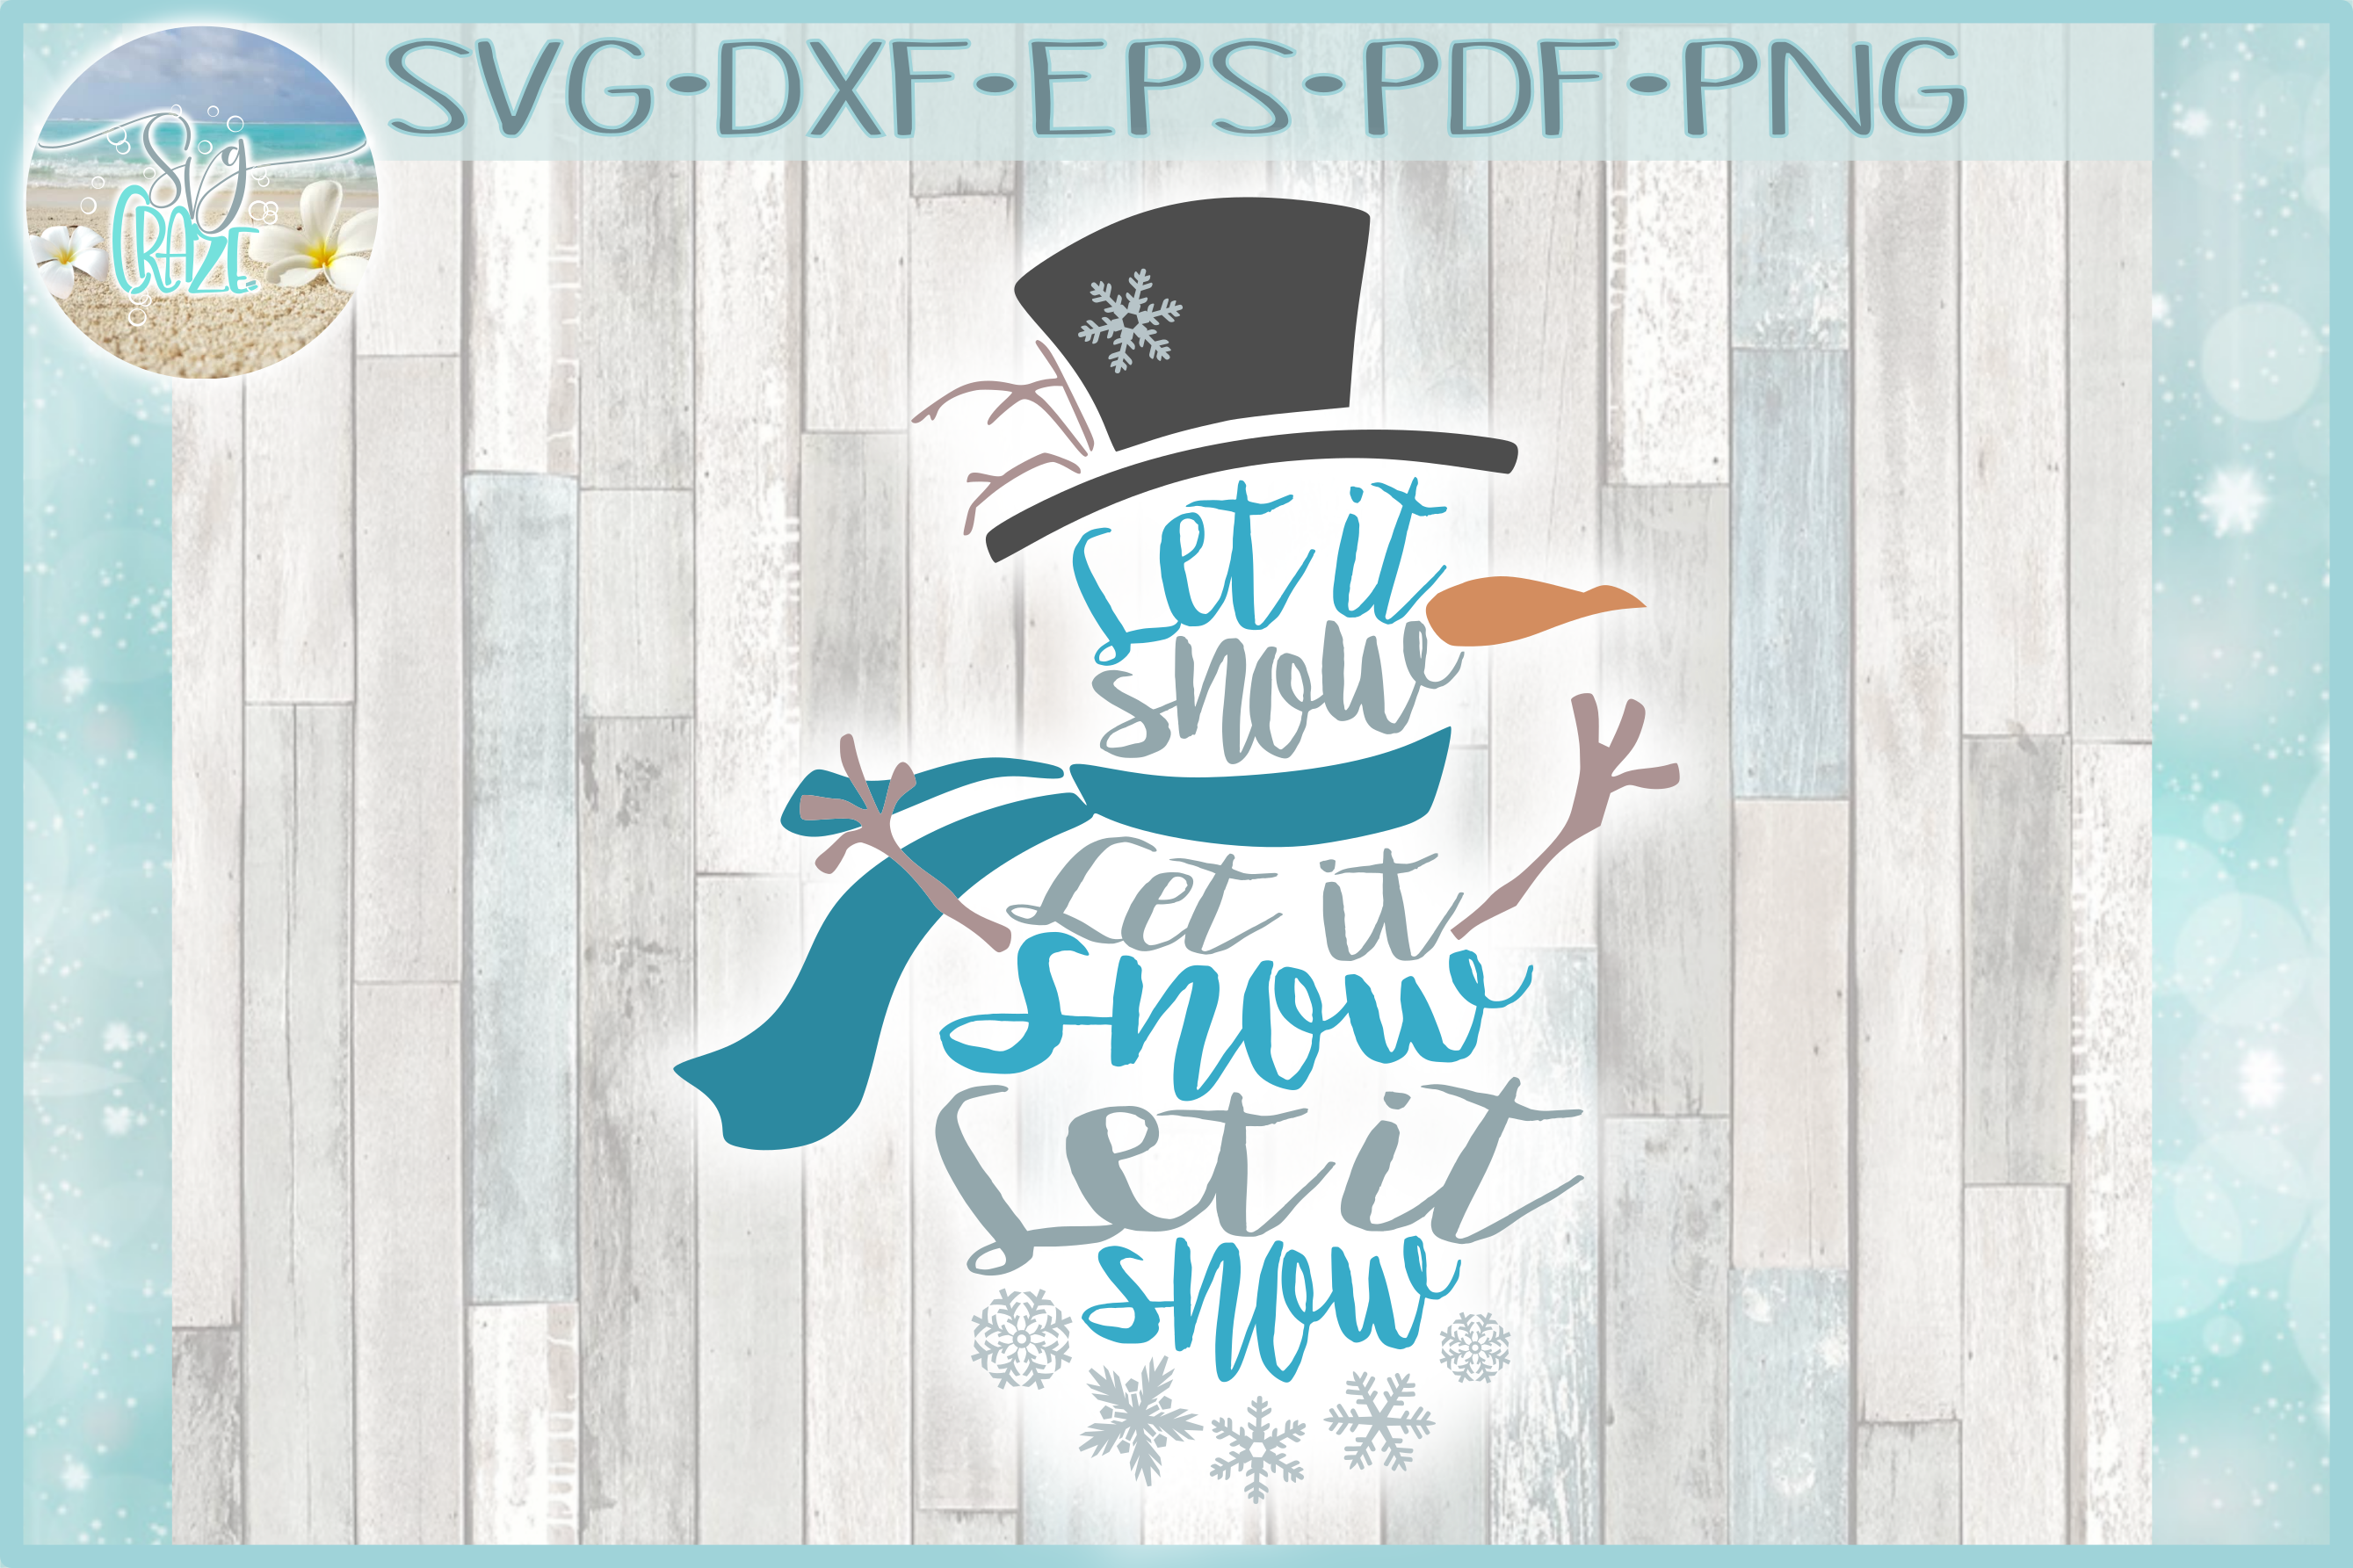 Let It Snow Word Snowman Christmas Winter Holiday SVG